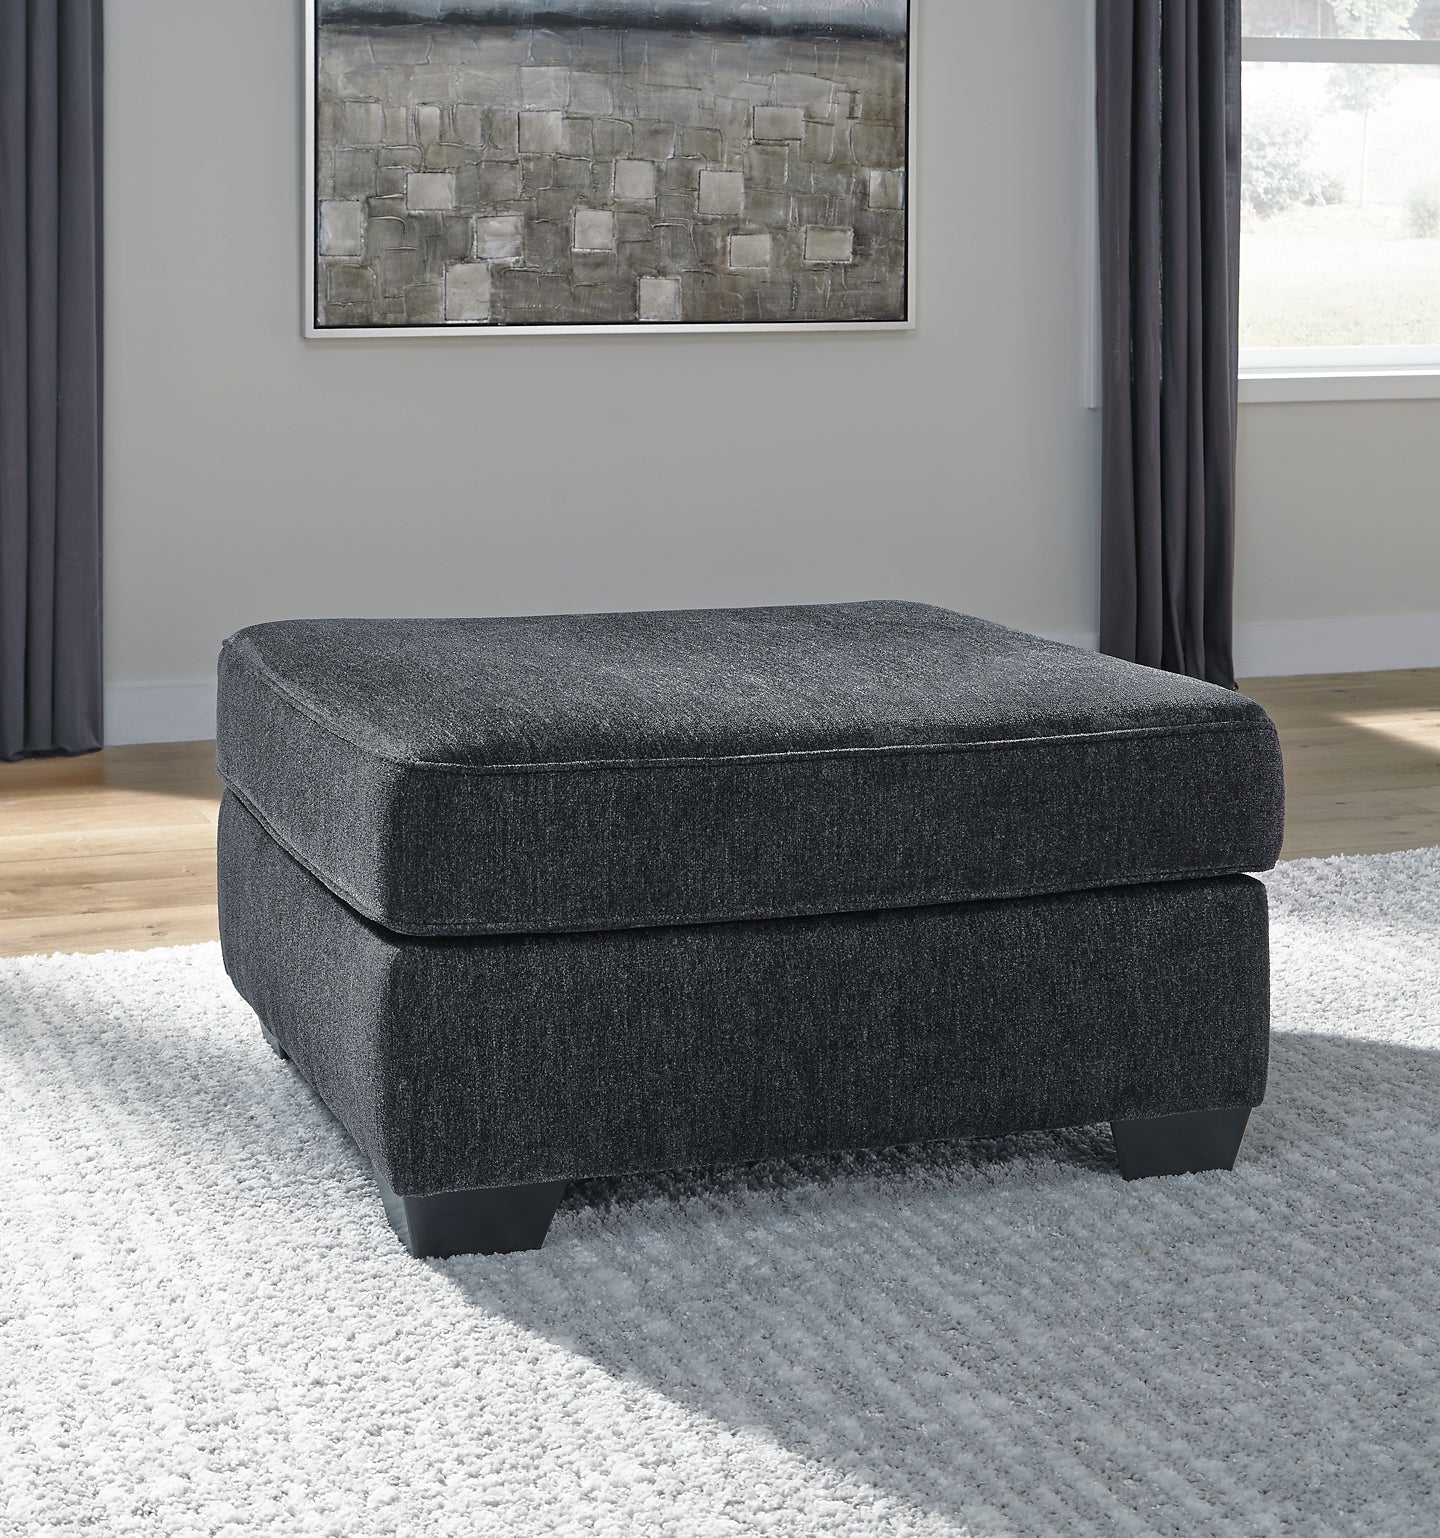 Altari 2-Piece Sectional with Ottoman